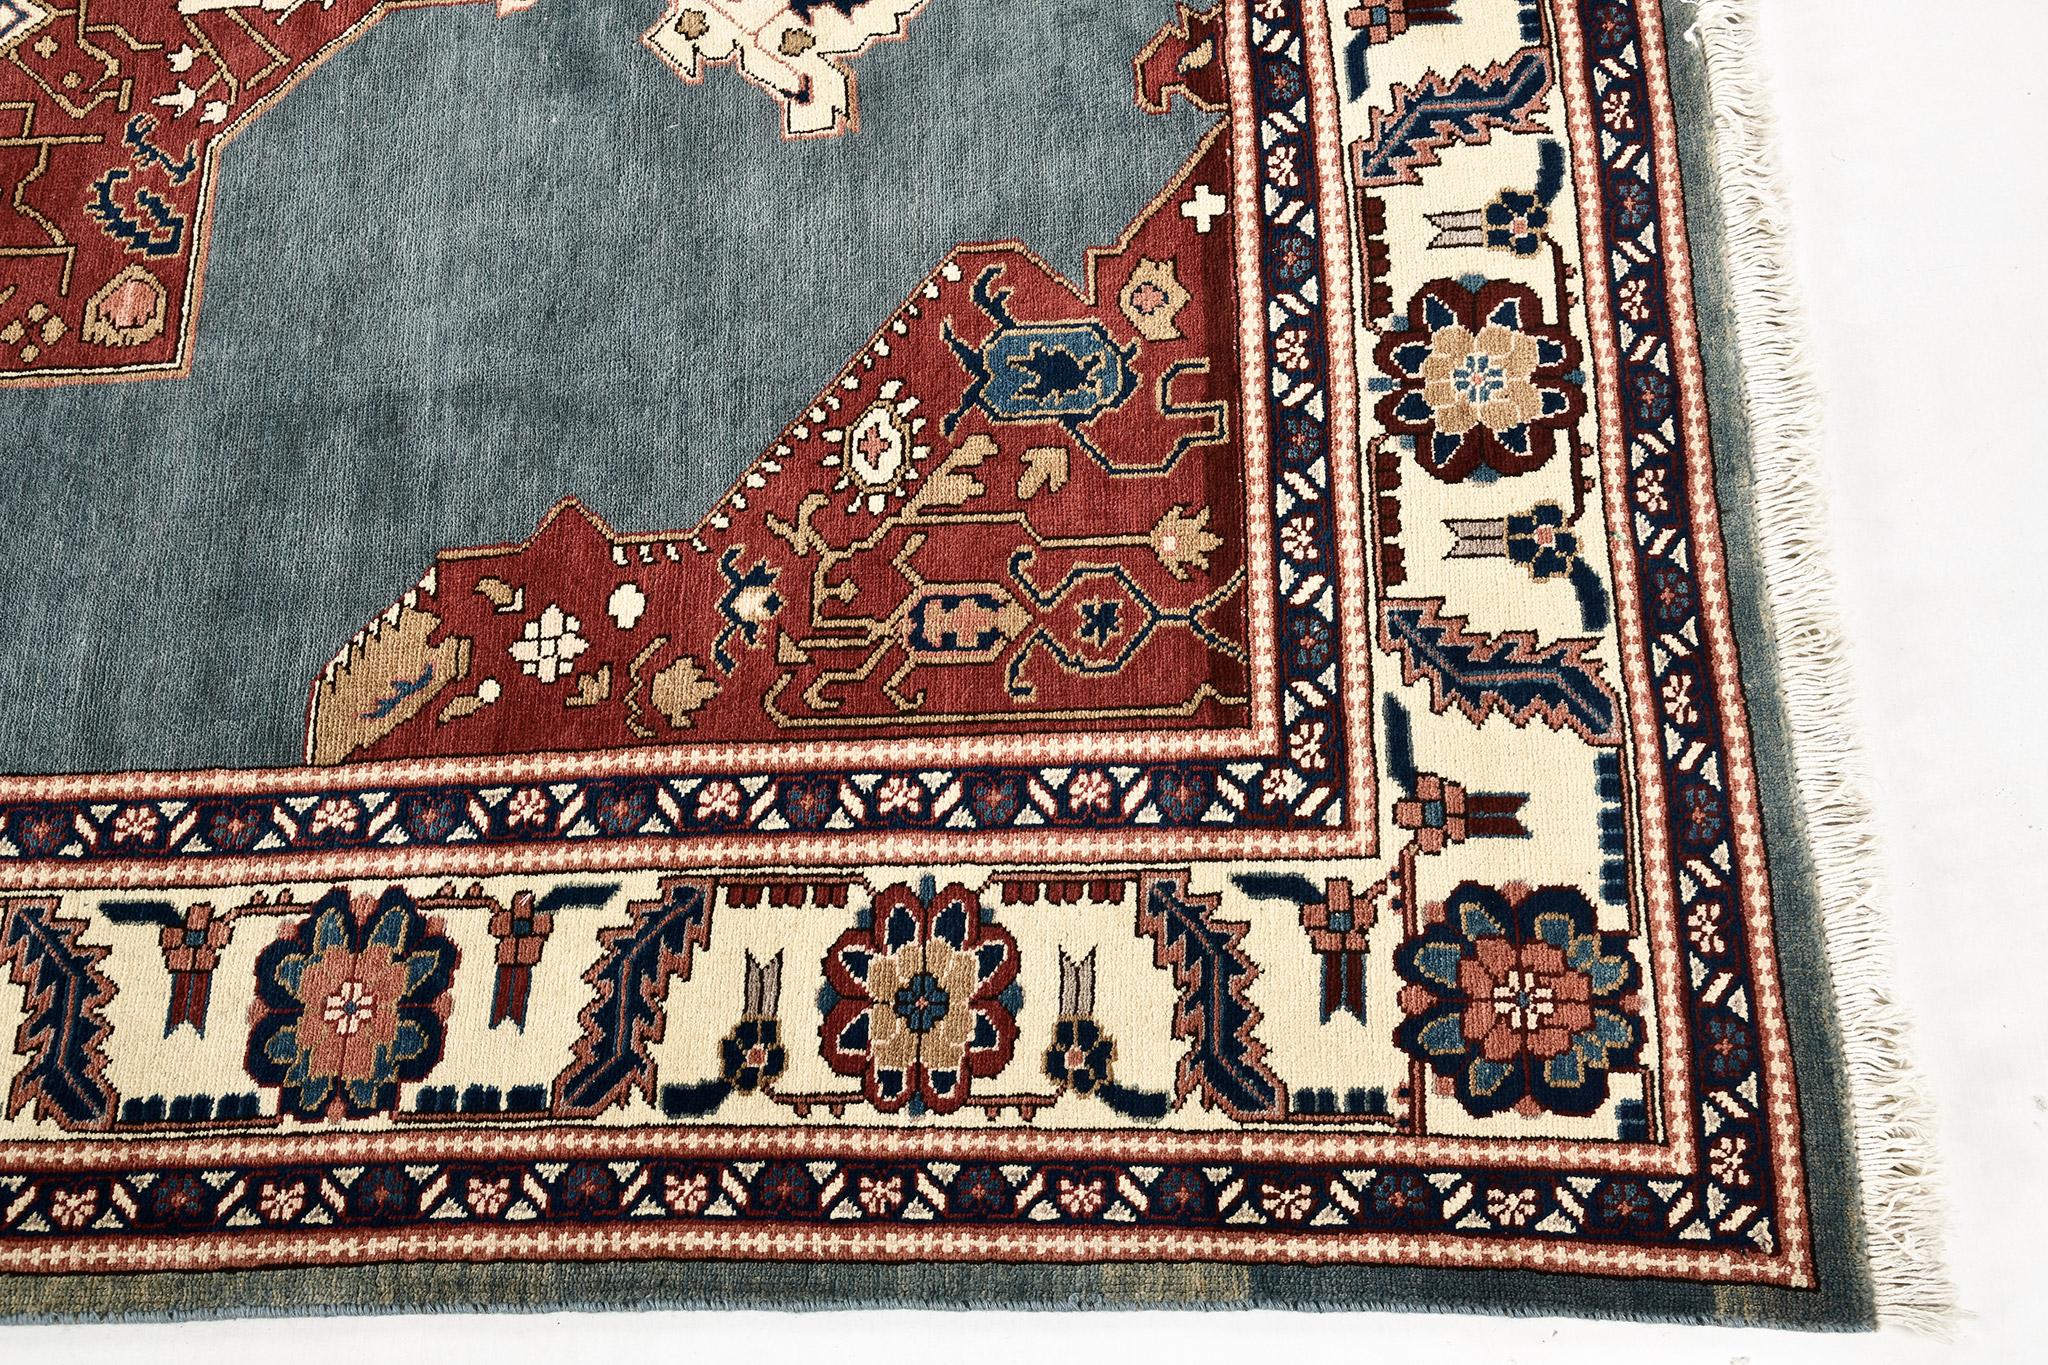 A majestic vintage Persian Heriz rug that is a masterpiece of renowned charm. Intricate embellishments in bold hues of terracotta, ivory and gold are harmoniously blending in a turquoise abrashed field that is exquisitely preserved in time. Every